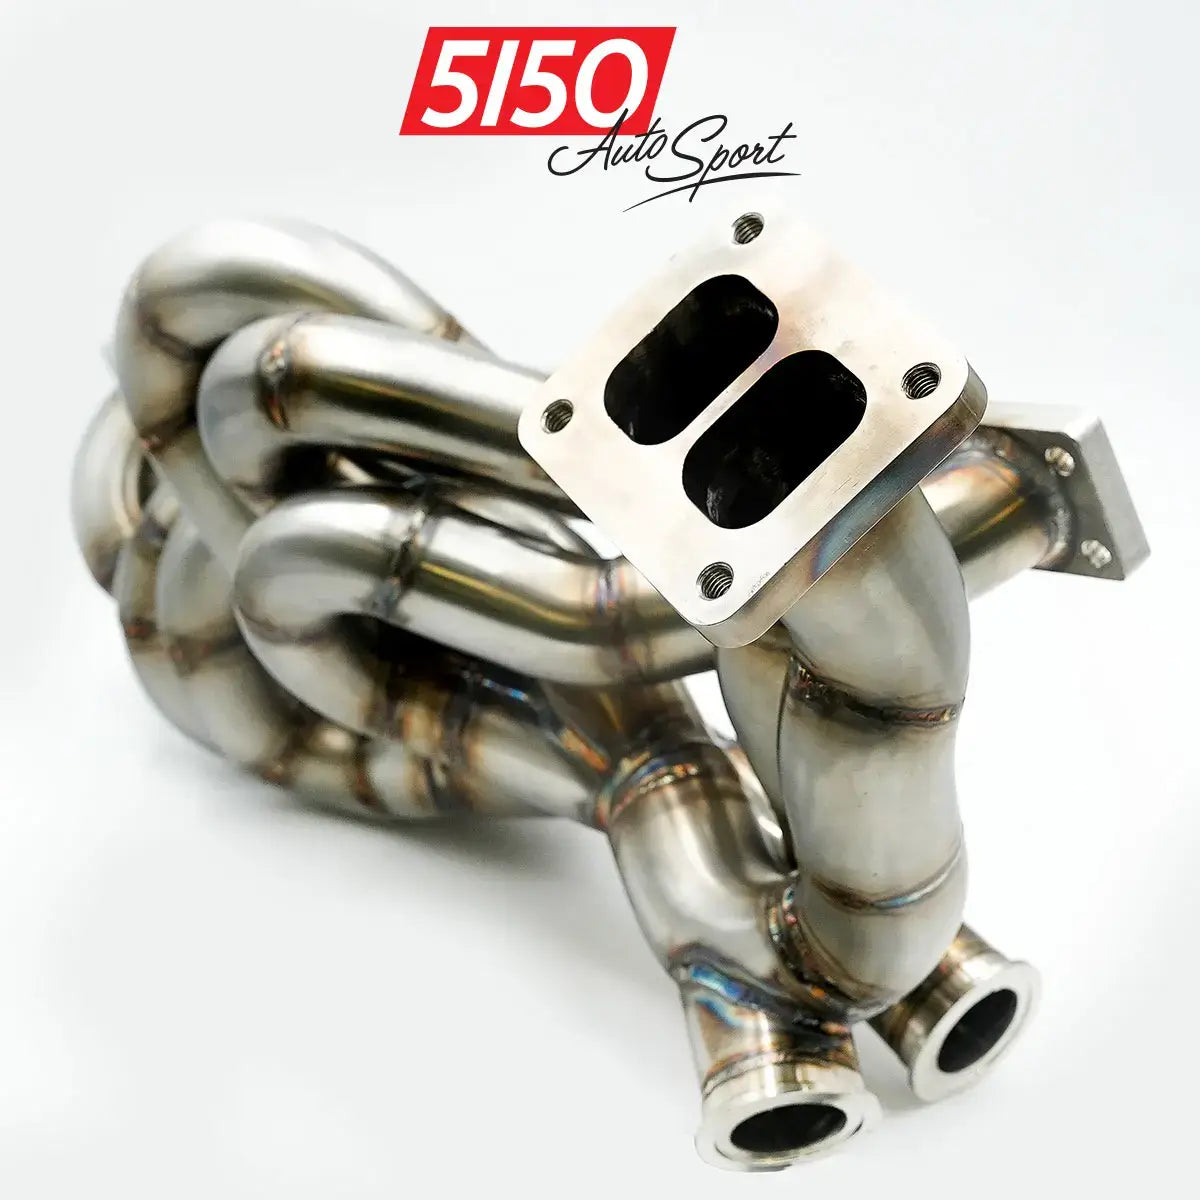 BMW Divided Turbo Manifold for E36